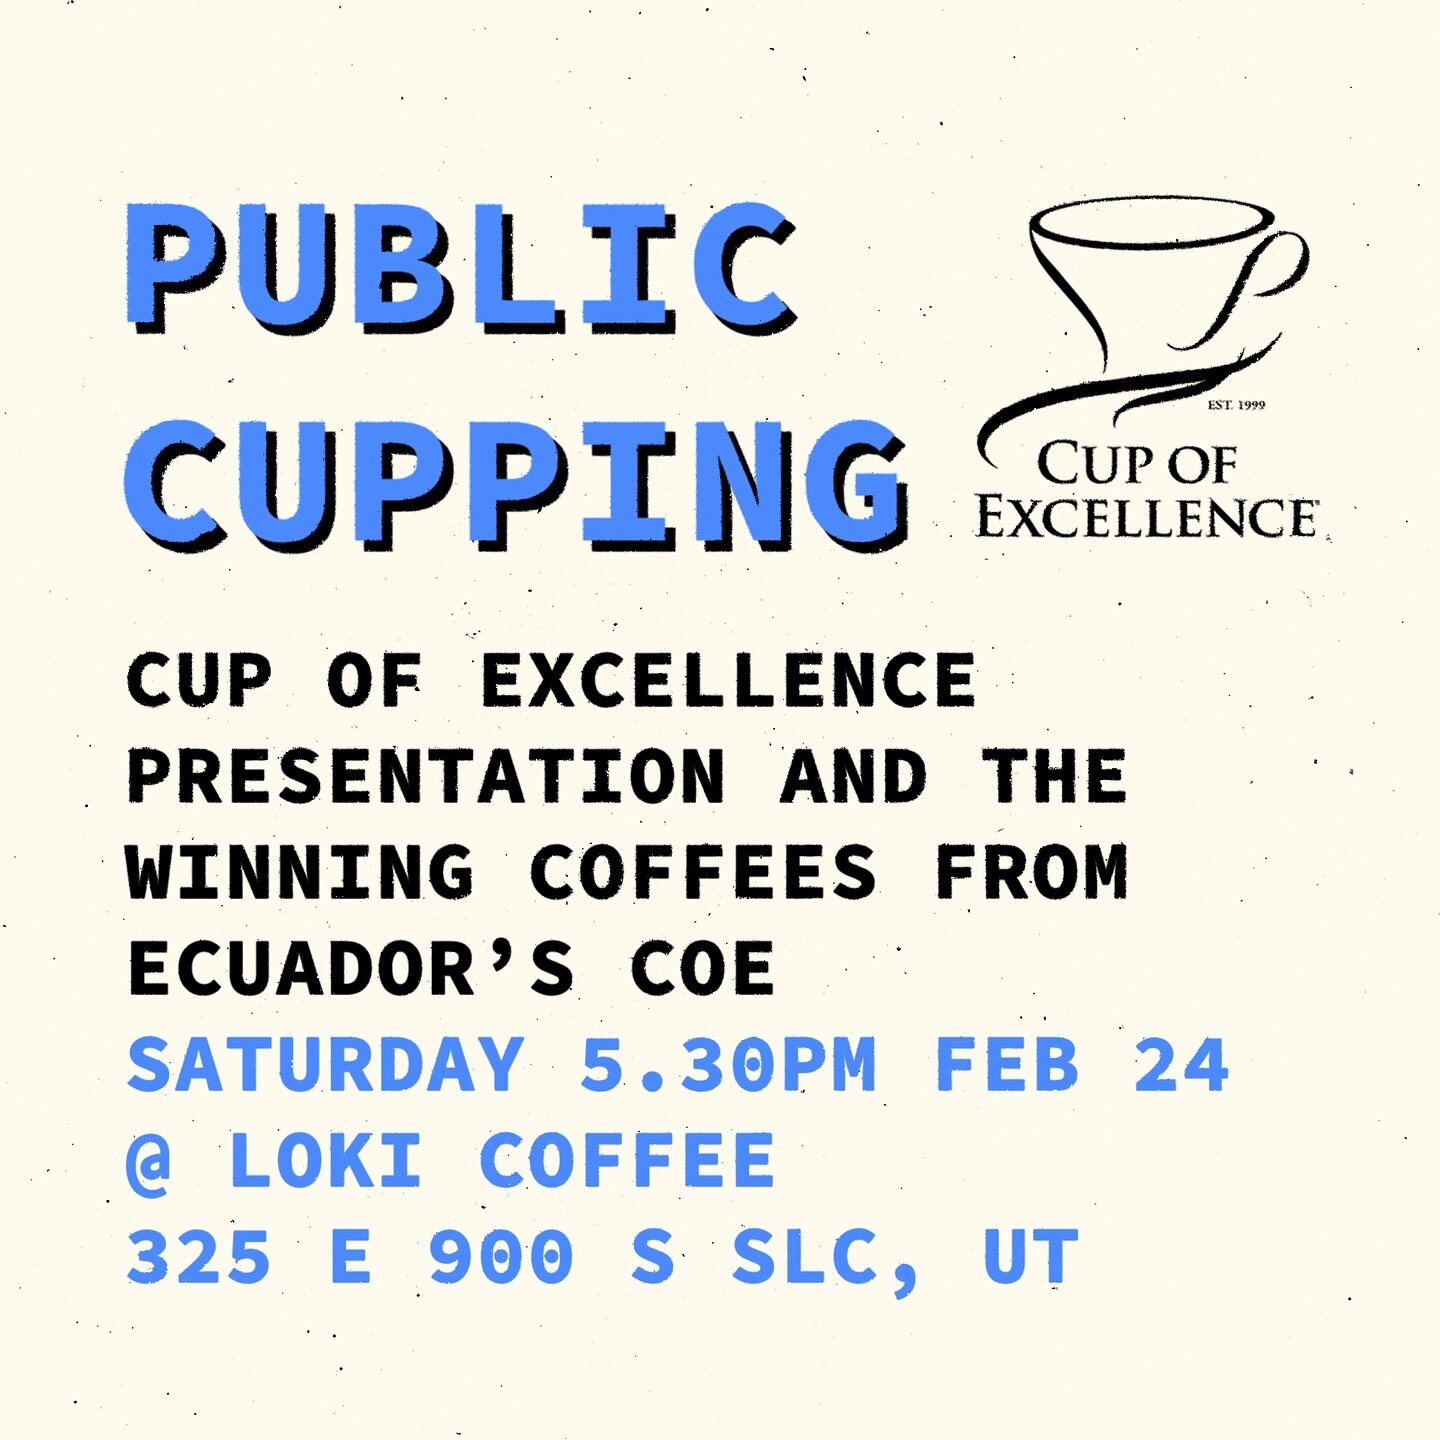 Next cupping is on the calendar! Join us and @allianceforcoffeeexcellence for an introduction to the @cupofexcellence program and a cupping of the winning coffees from this years program in Ecuador.

See you in 10 days at @lokicoffeeco; sign up the l